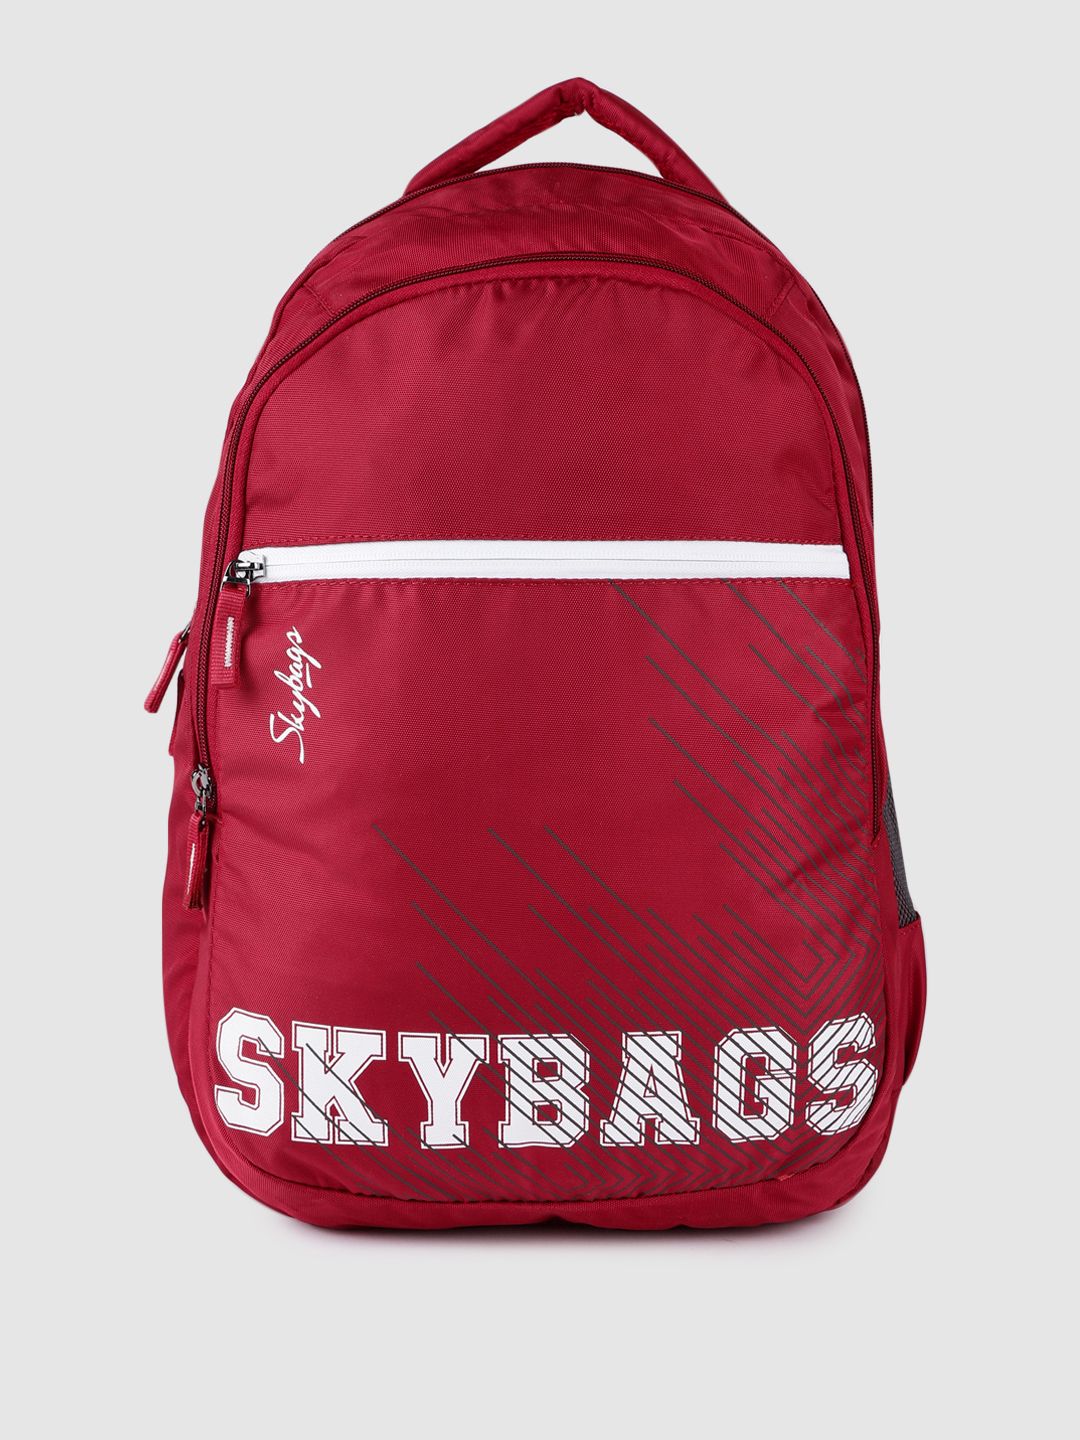 Skybags Unisex Red Brand Logo Backpack Price in India